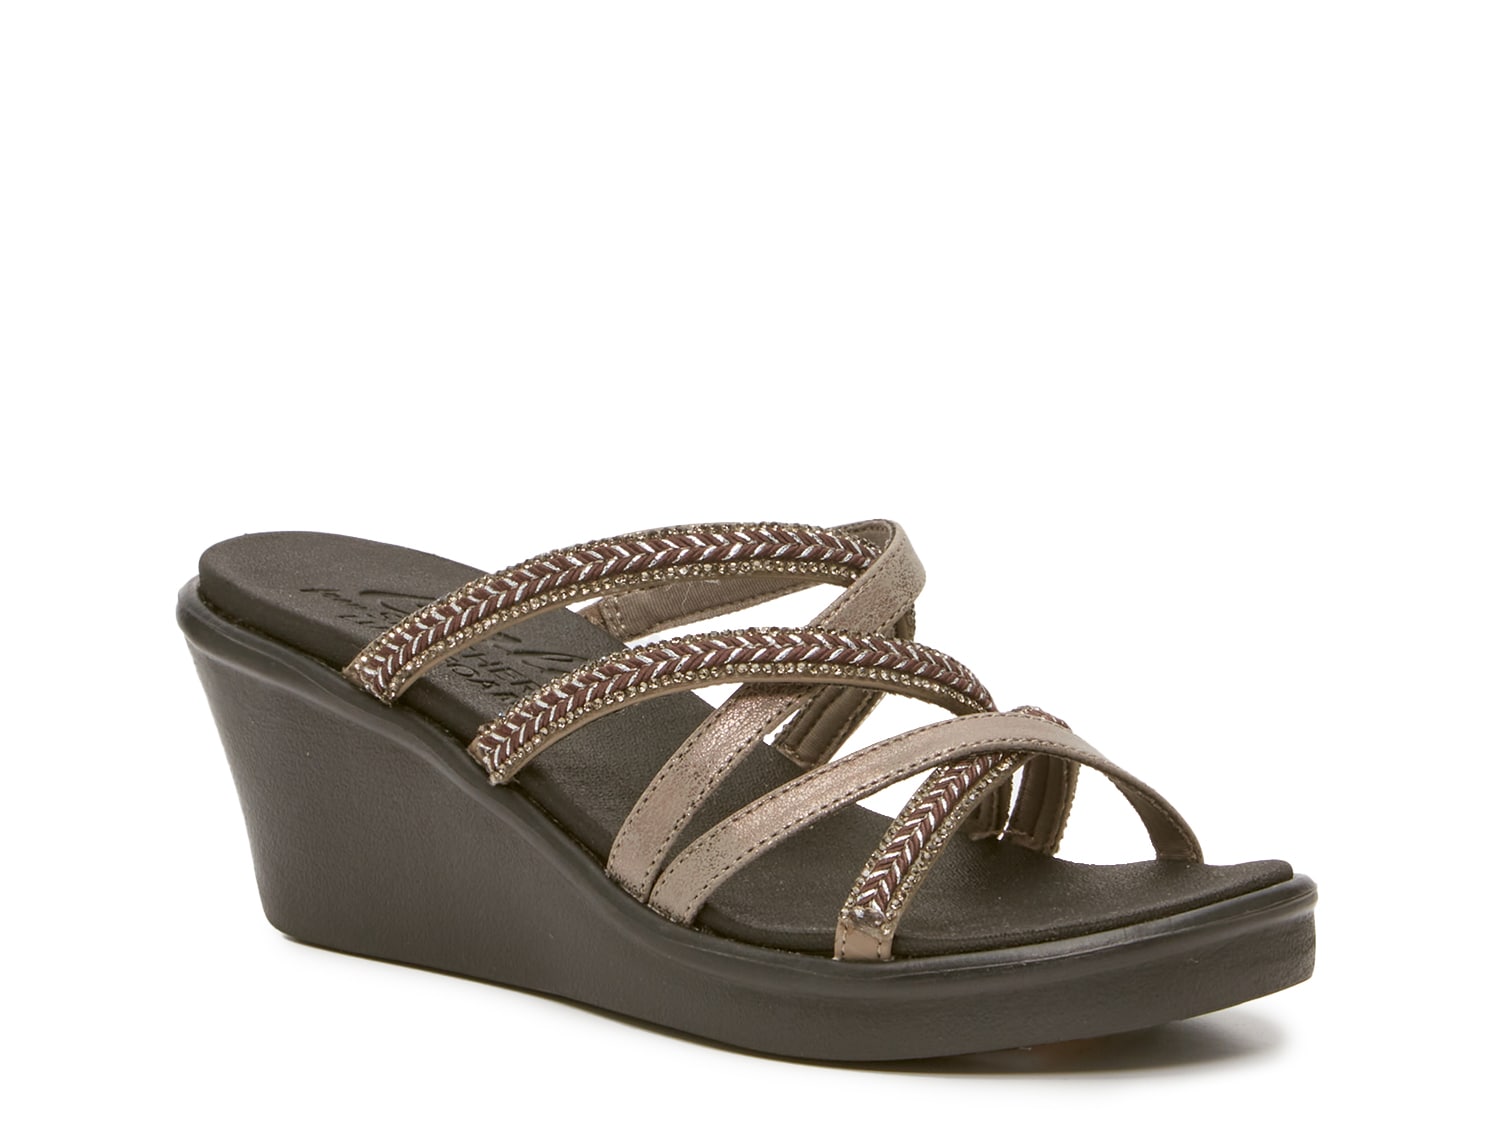 Skechers Rumble On Wedge Sandal - Free Shipping | DSW